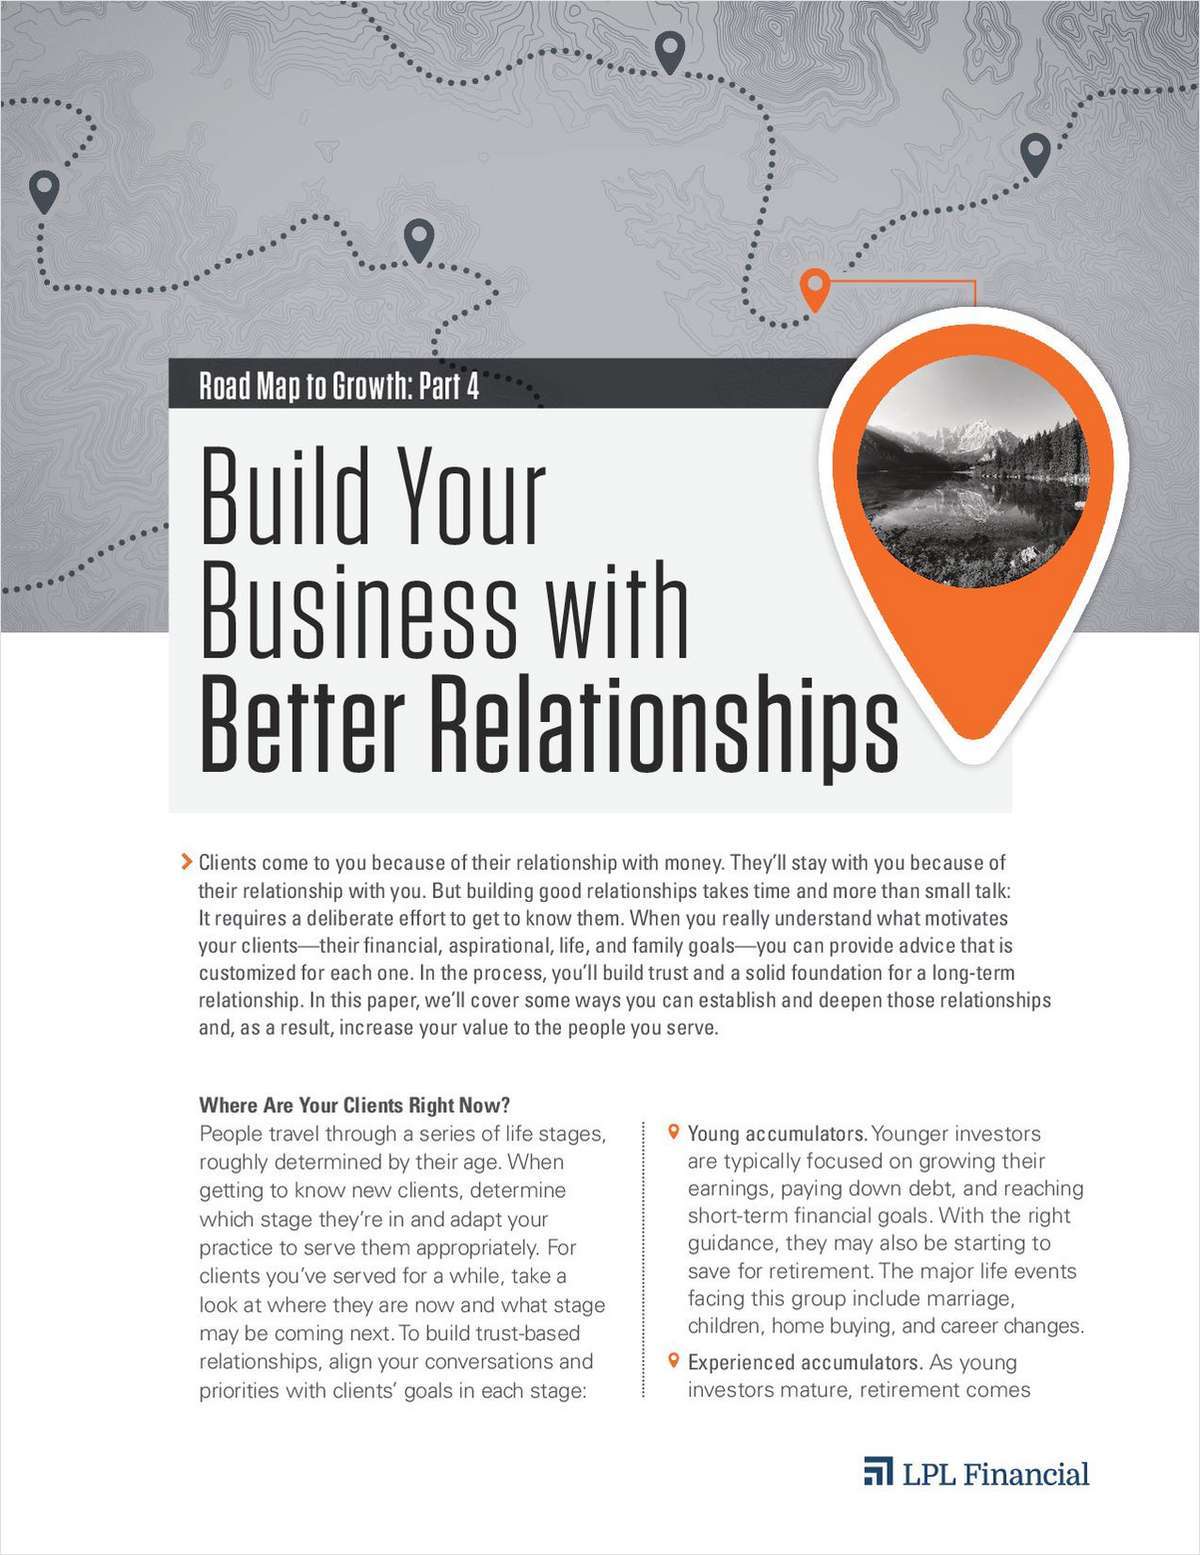 Build Your Business with Better Relationships